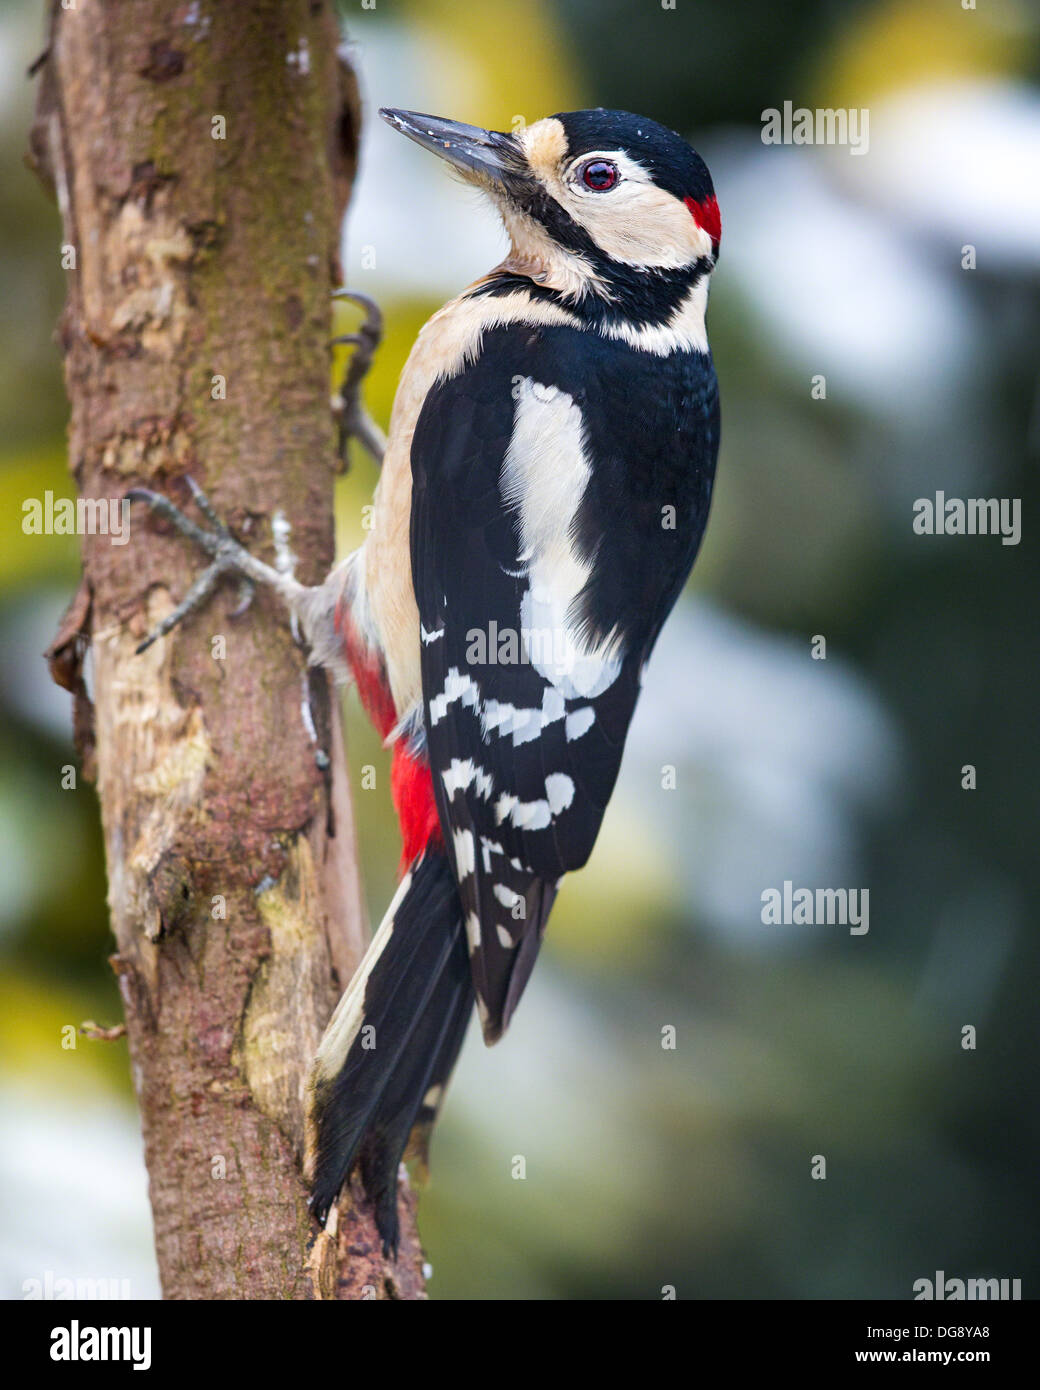 Close-up of a male great spotted woodpecker (Dendrocopos major) feeding on a tree trunk, side view,Essex, UK Stock Photo